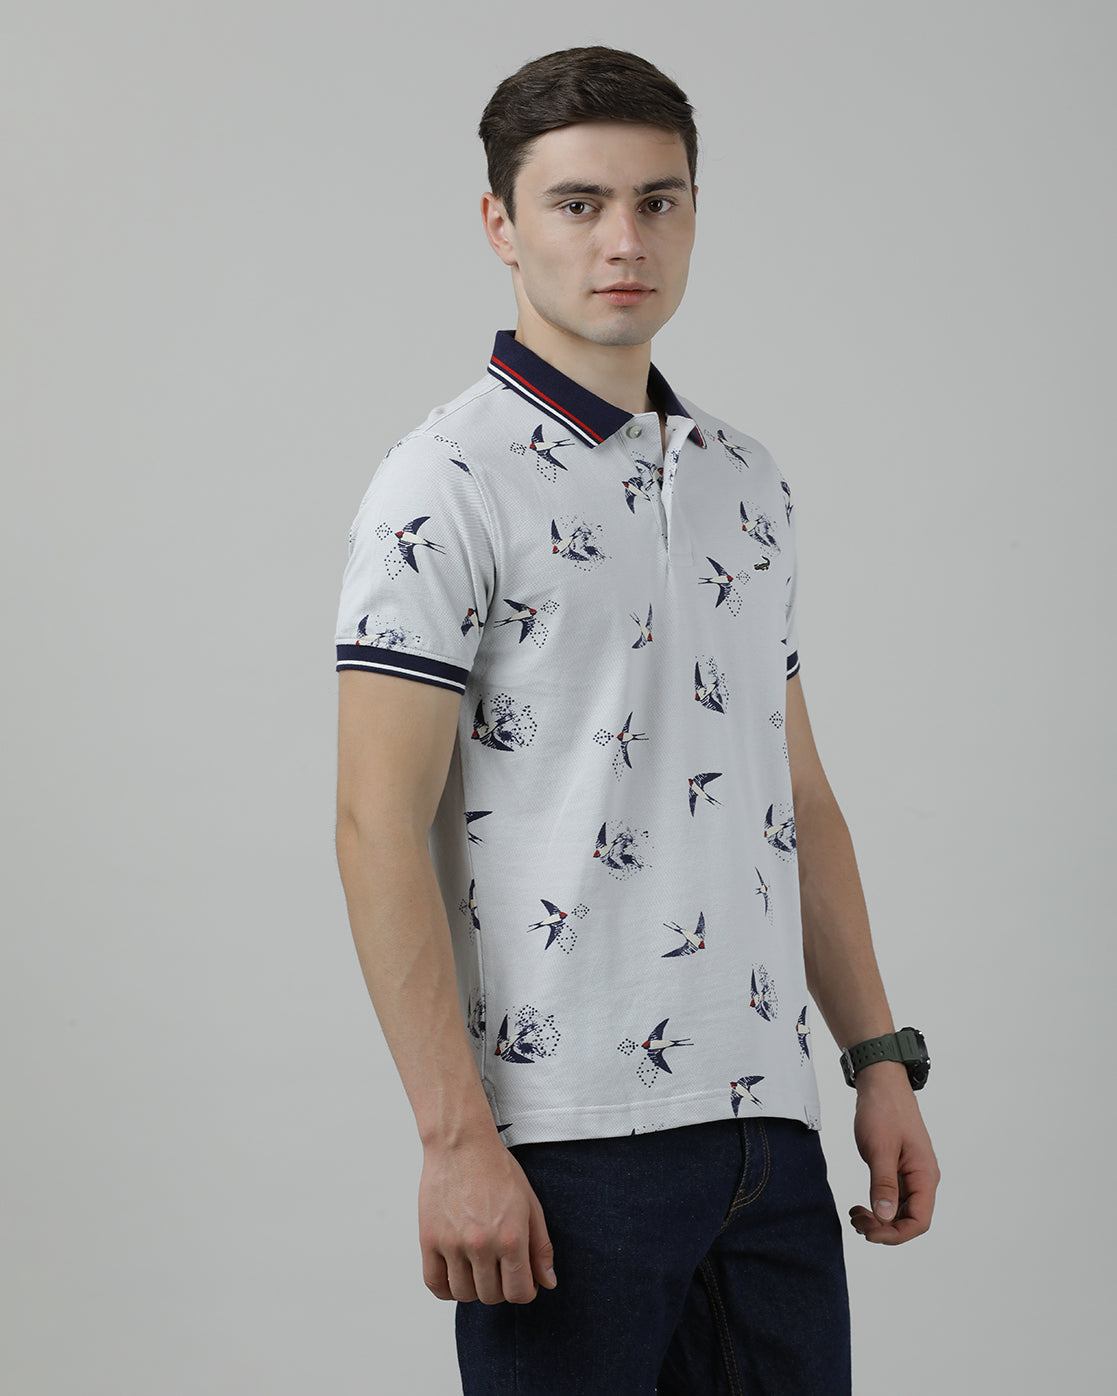 Casual Light Grey T-Shirt Polo Printed Half Sleeve Slim Fit with Collar for Men